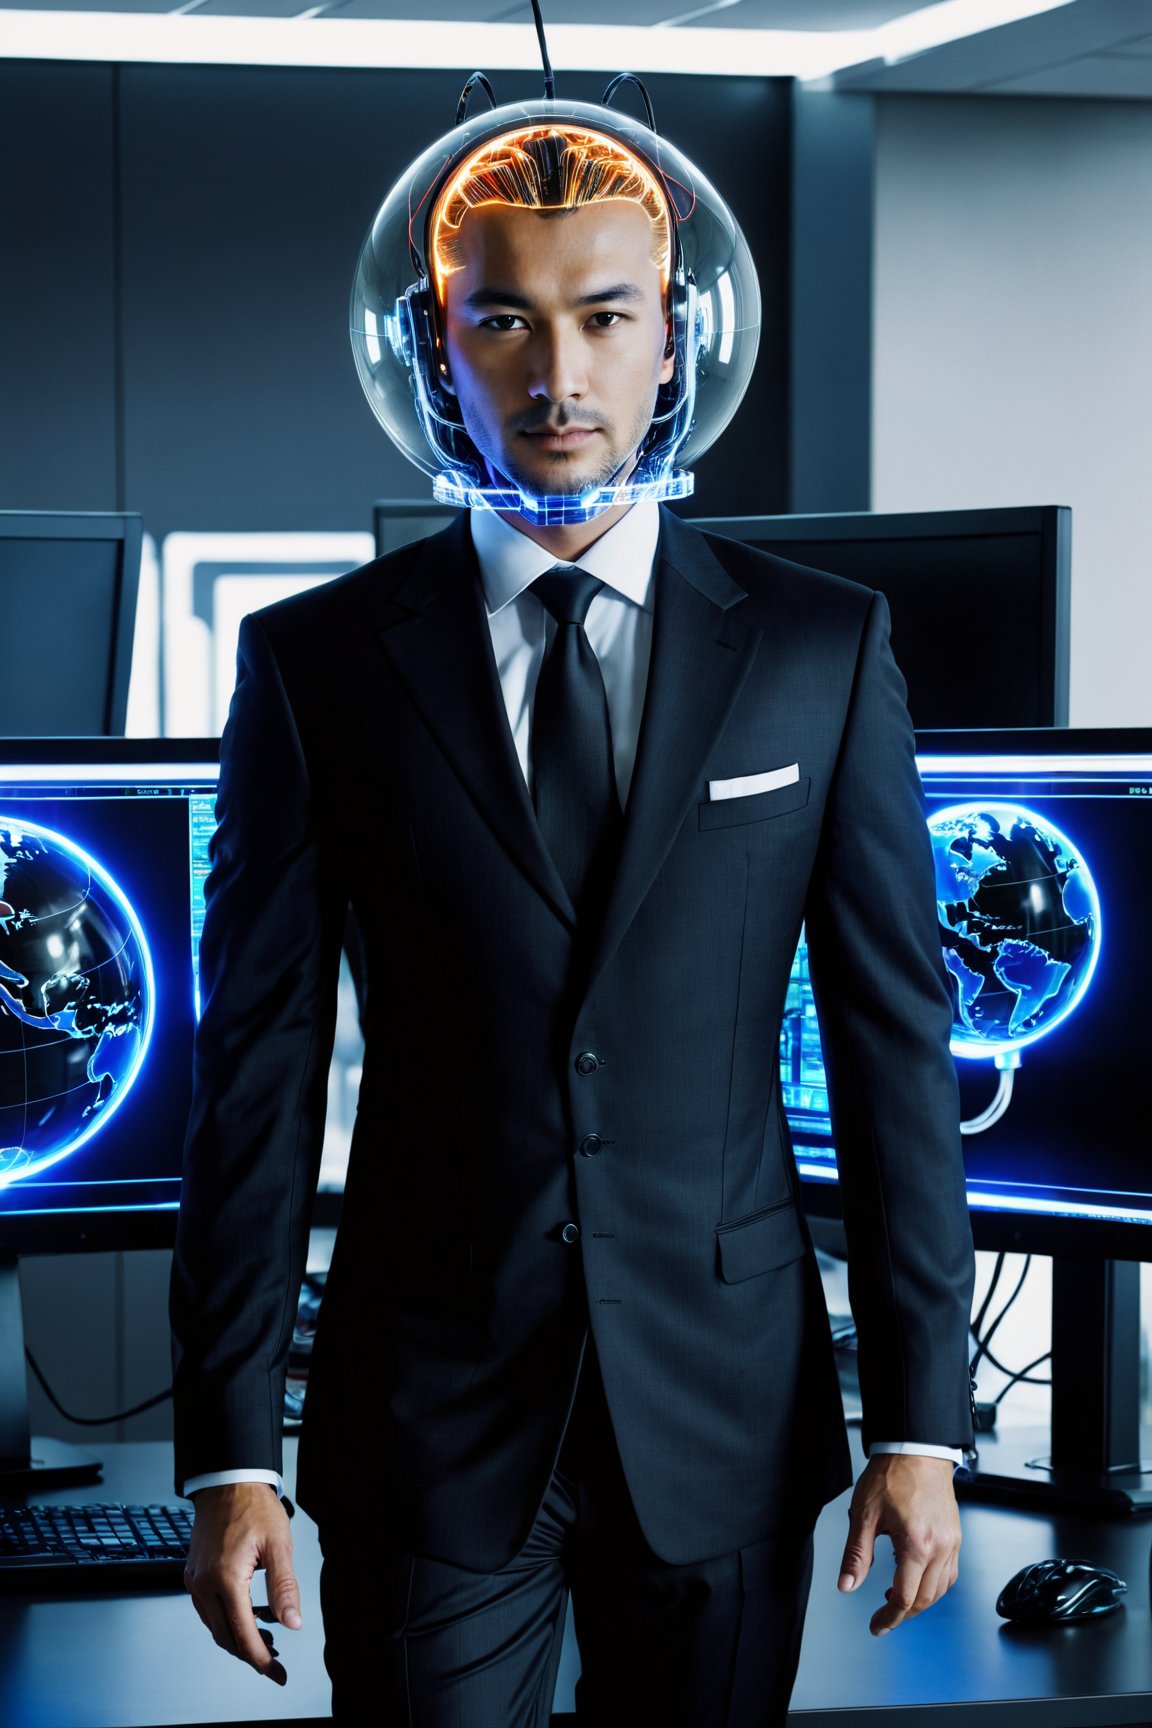 feature glowing sphere head, transparent head, sole_male, suited man, cybertech suit, office, multiple computers, wires, glowing displays